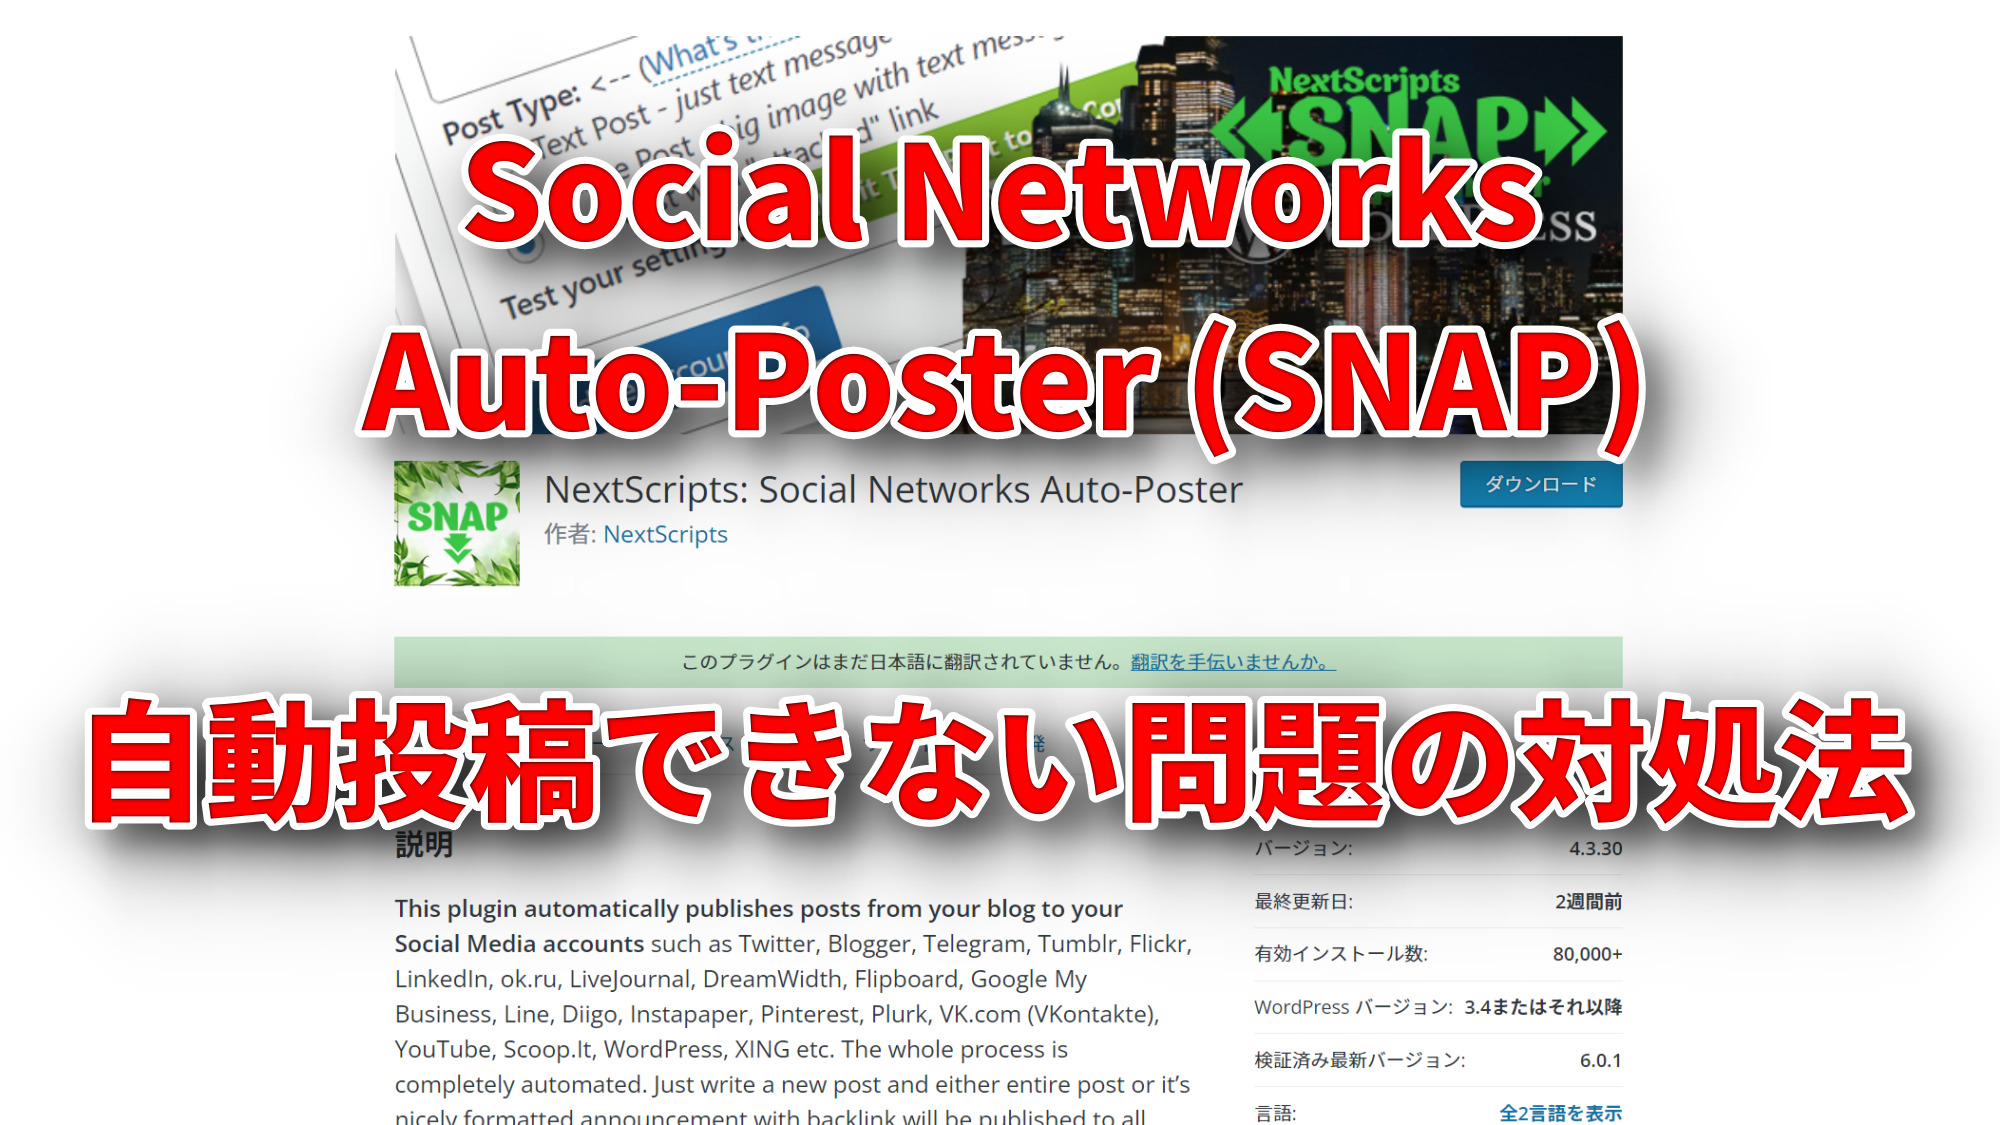 Social Networks Auto-Poster